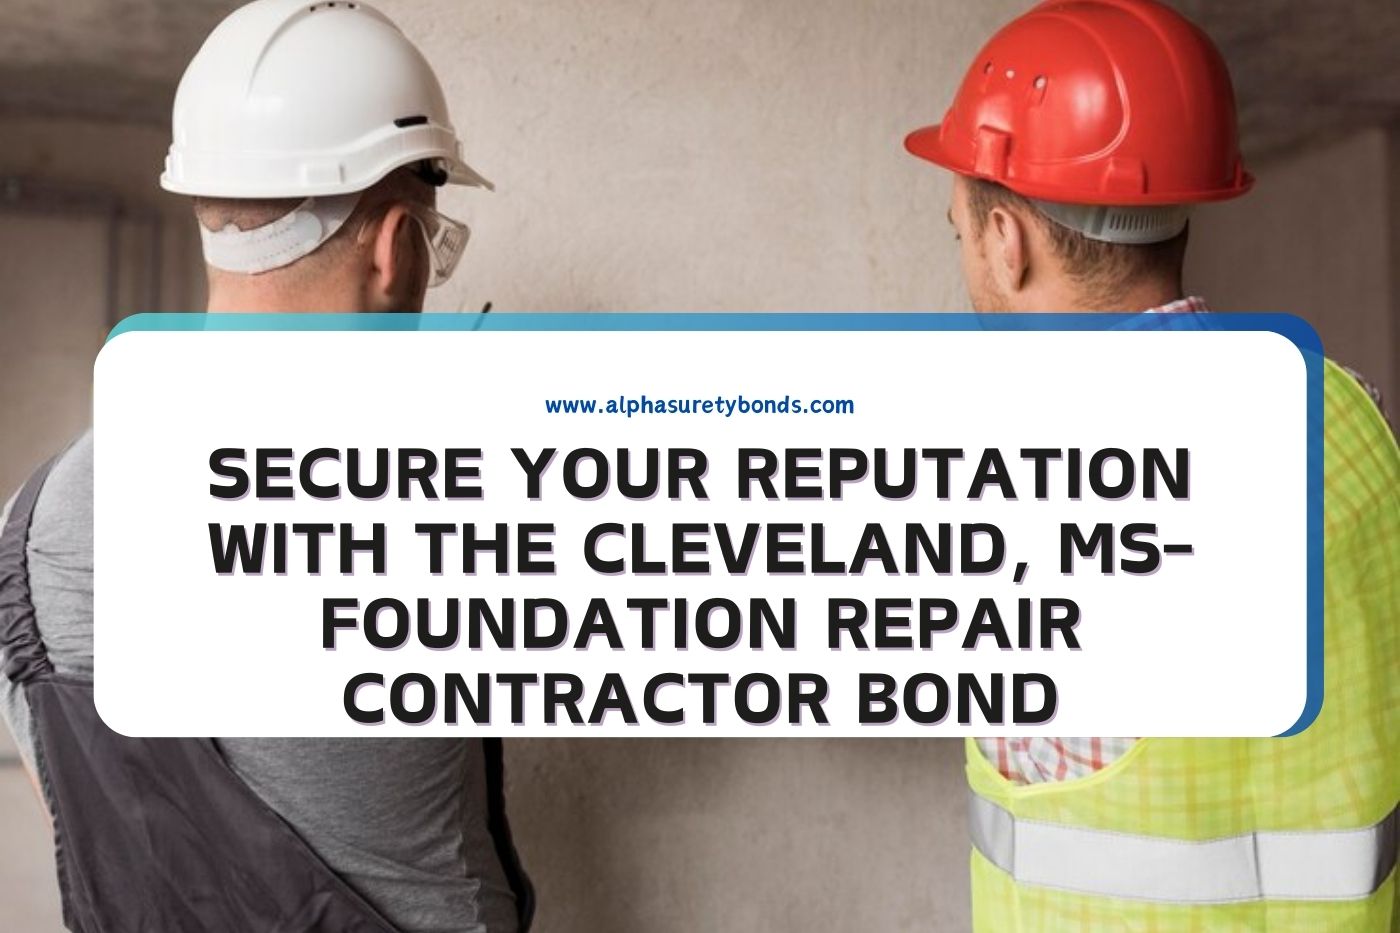 Secure Your Reputation with the Cleveland, MS-Foundation Repair Contractor Bond